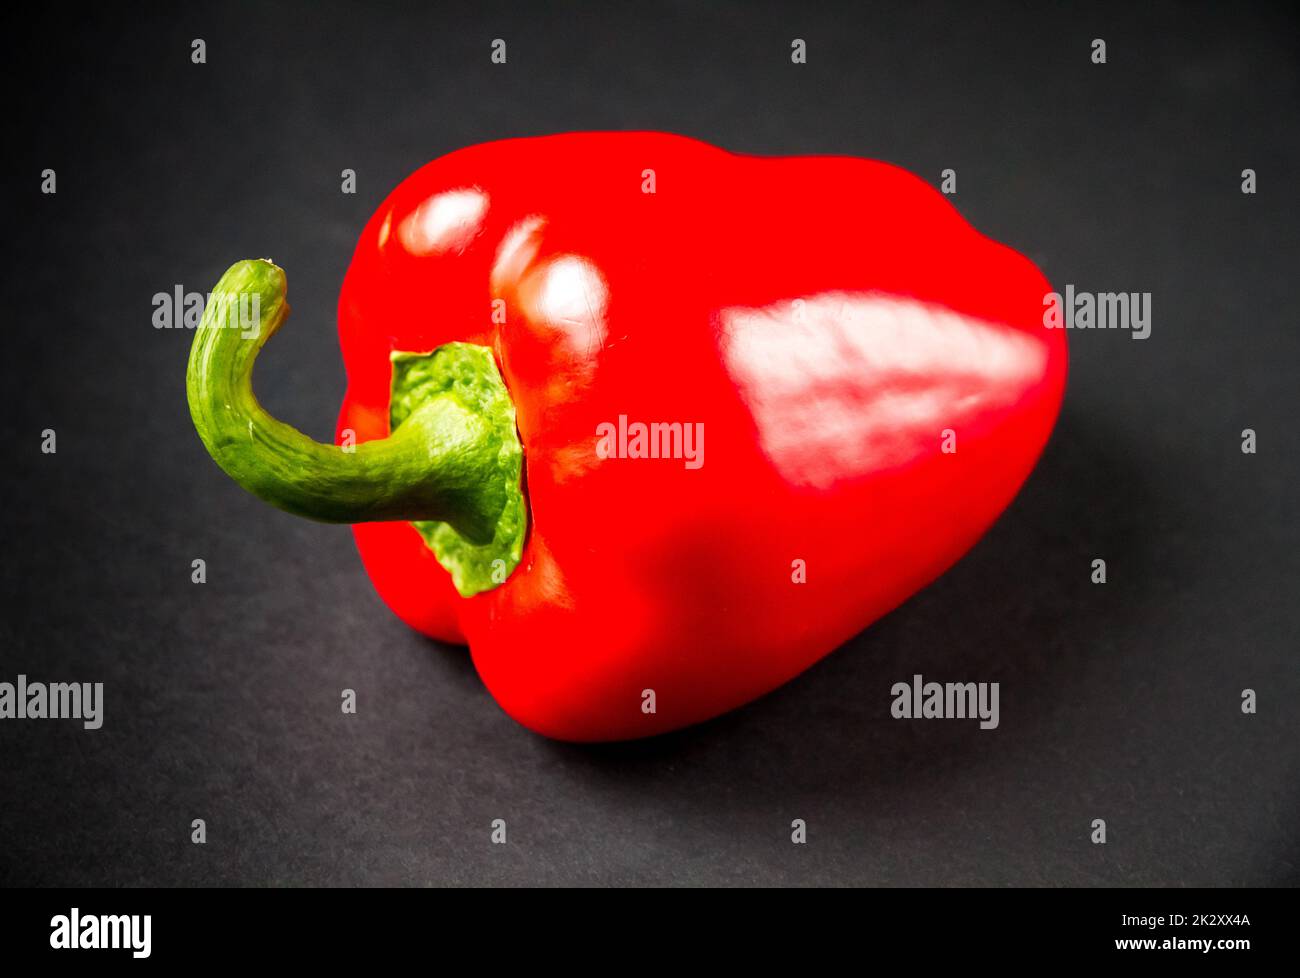 Red bell pepper isolated on black background Stock Photo